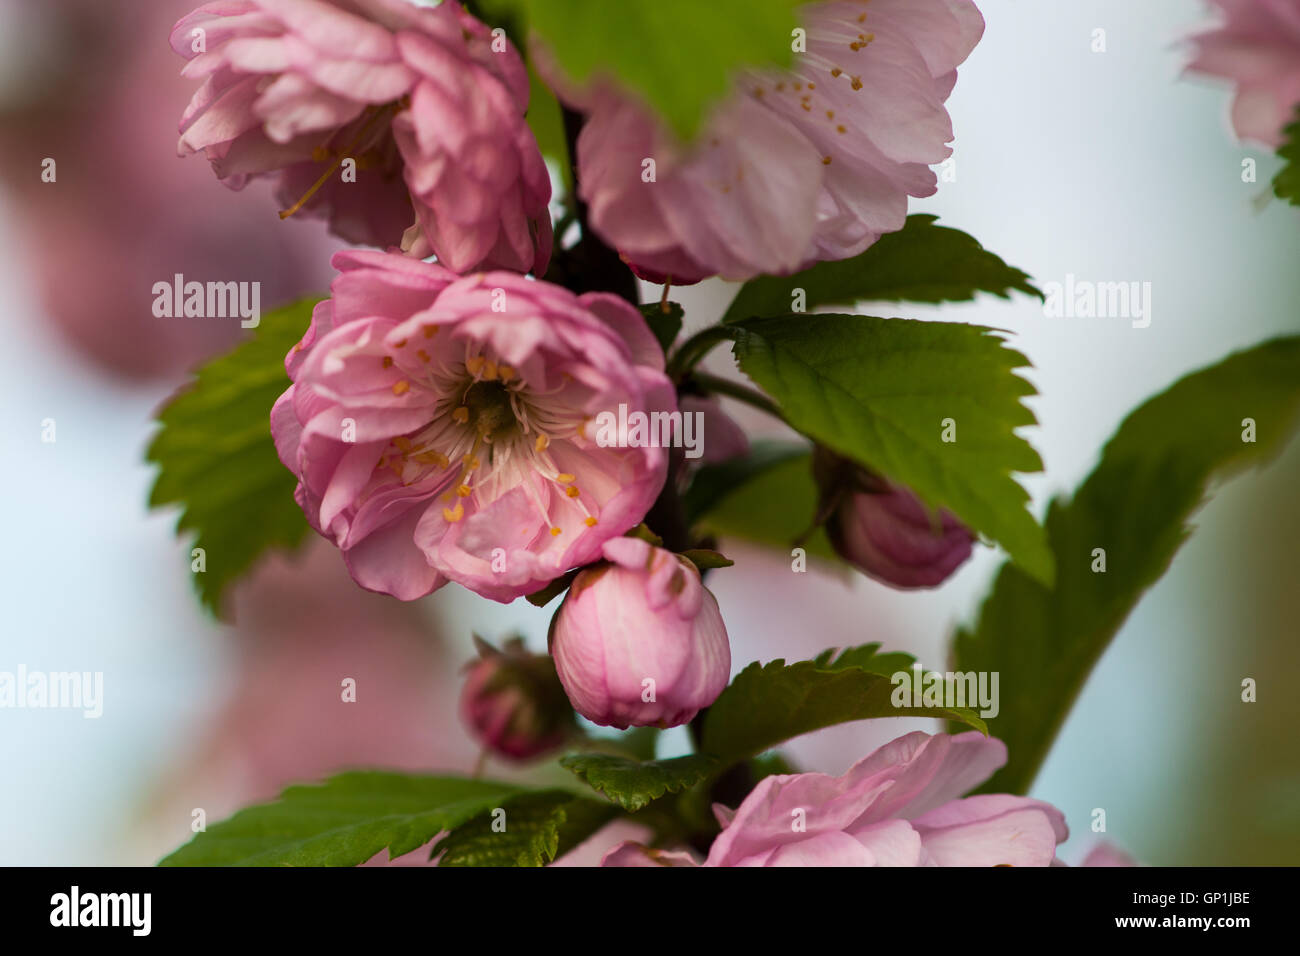 Flowering plum or prunus triloba flowers of pink color. Green leaves and pale background. Spring theme. Stock Photo